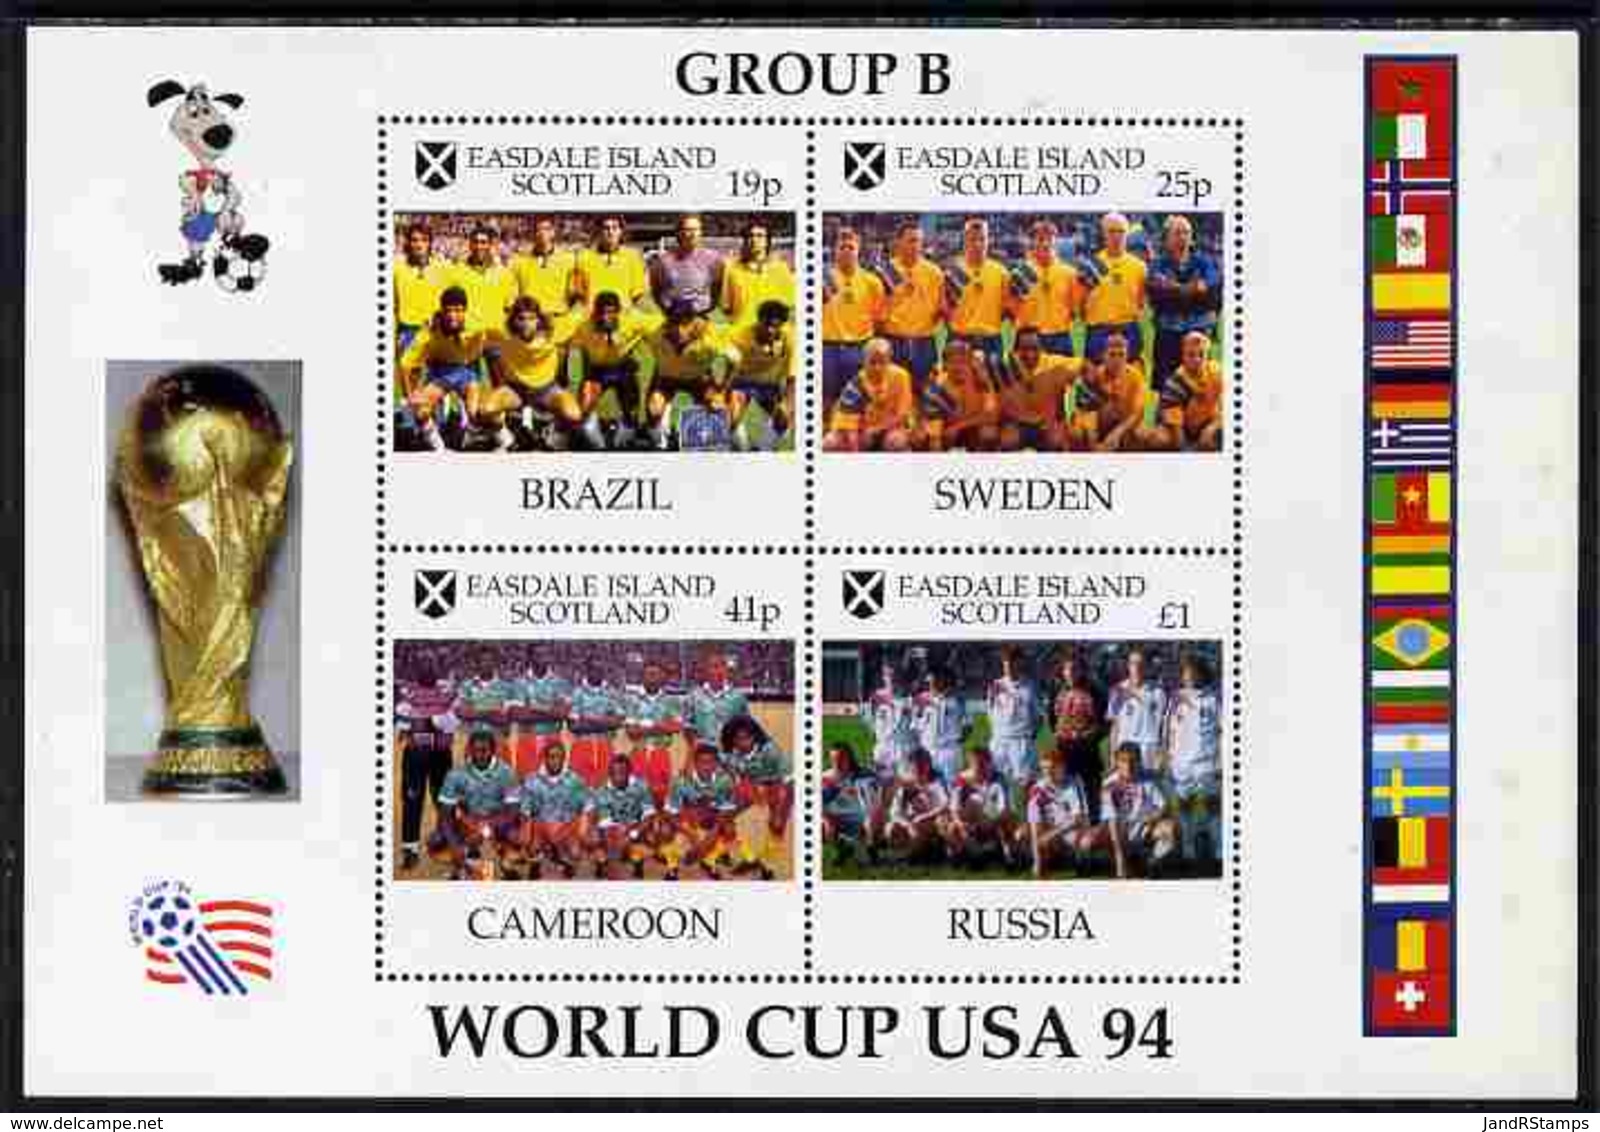 Easdale 1994 Football World Cup - Group B Countries Perf Sheetlet Containing 4 Values, Unmounted Mint - Local Issues